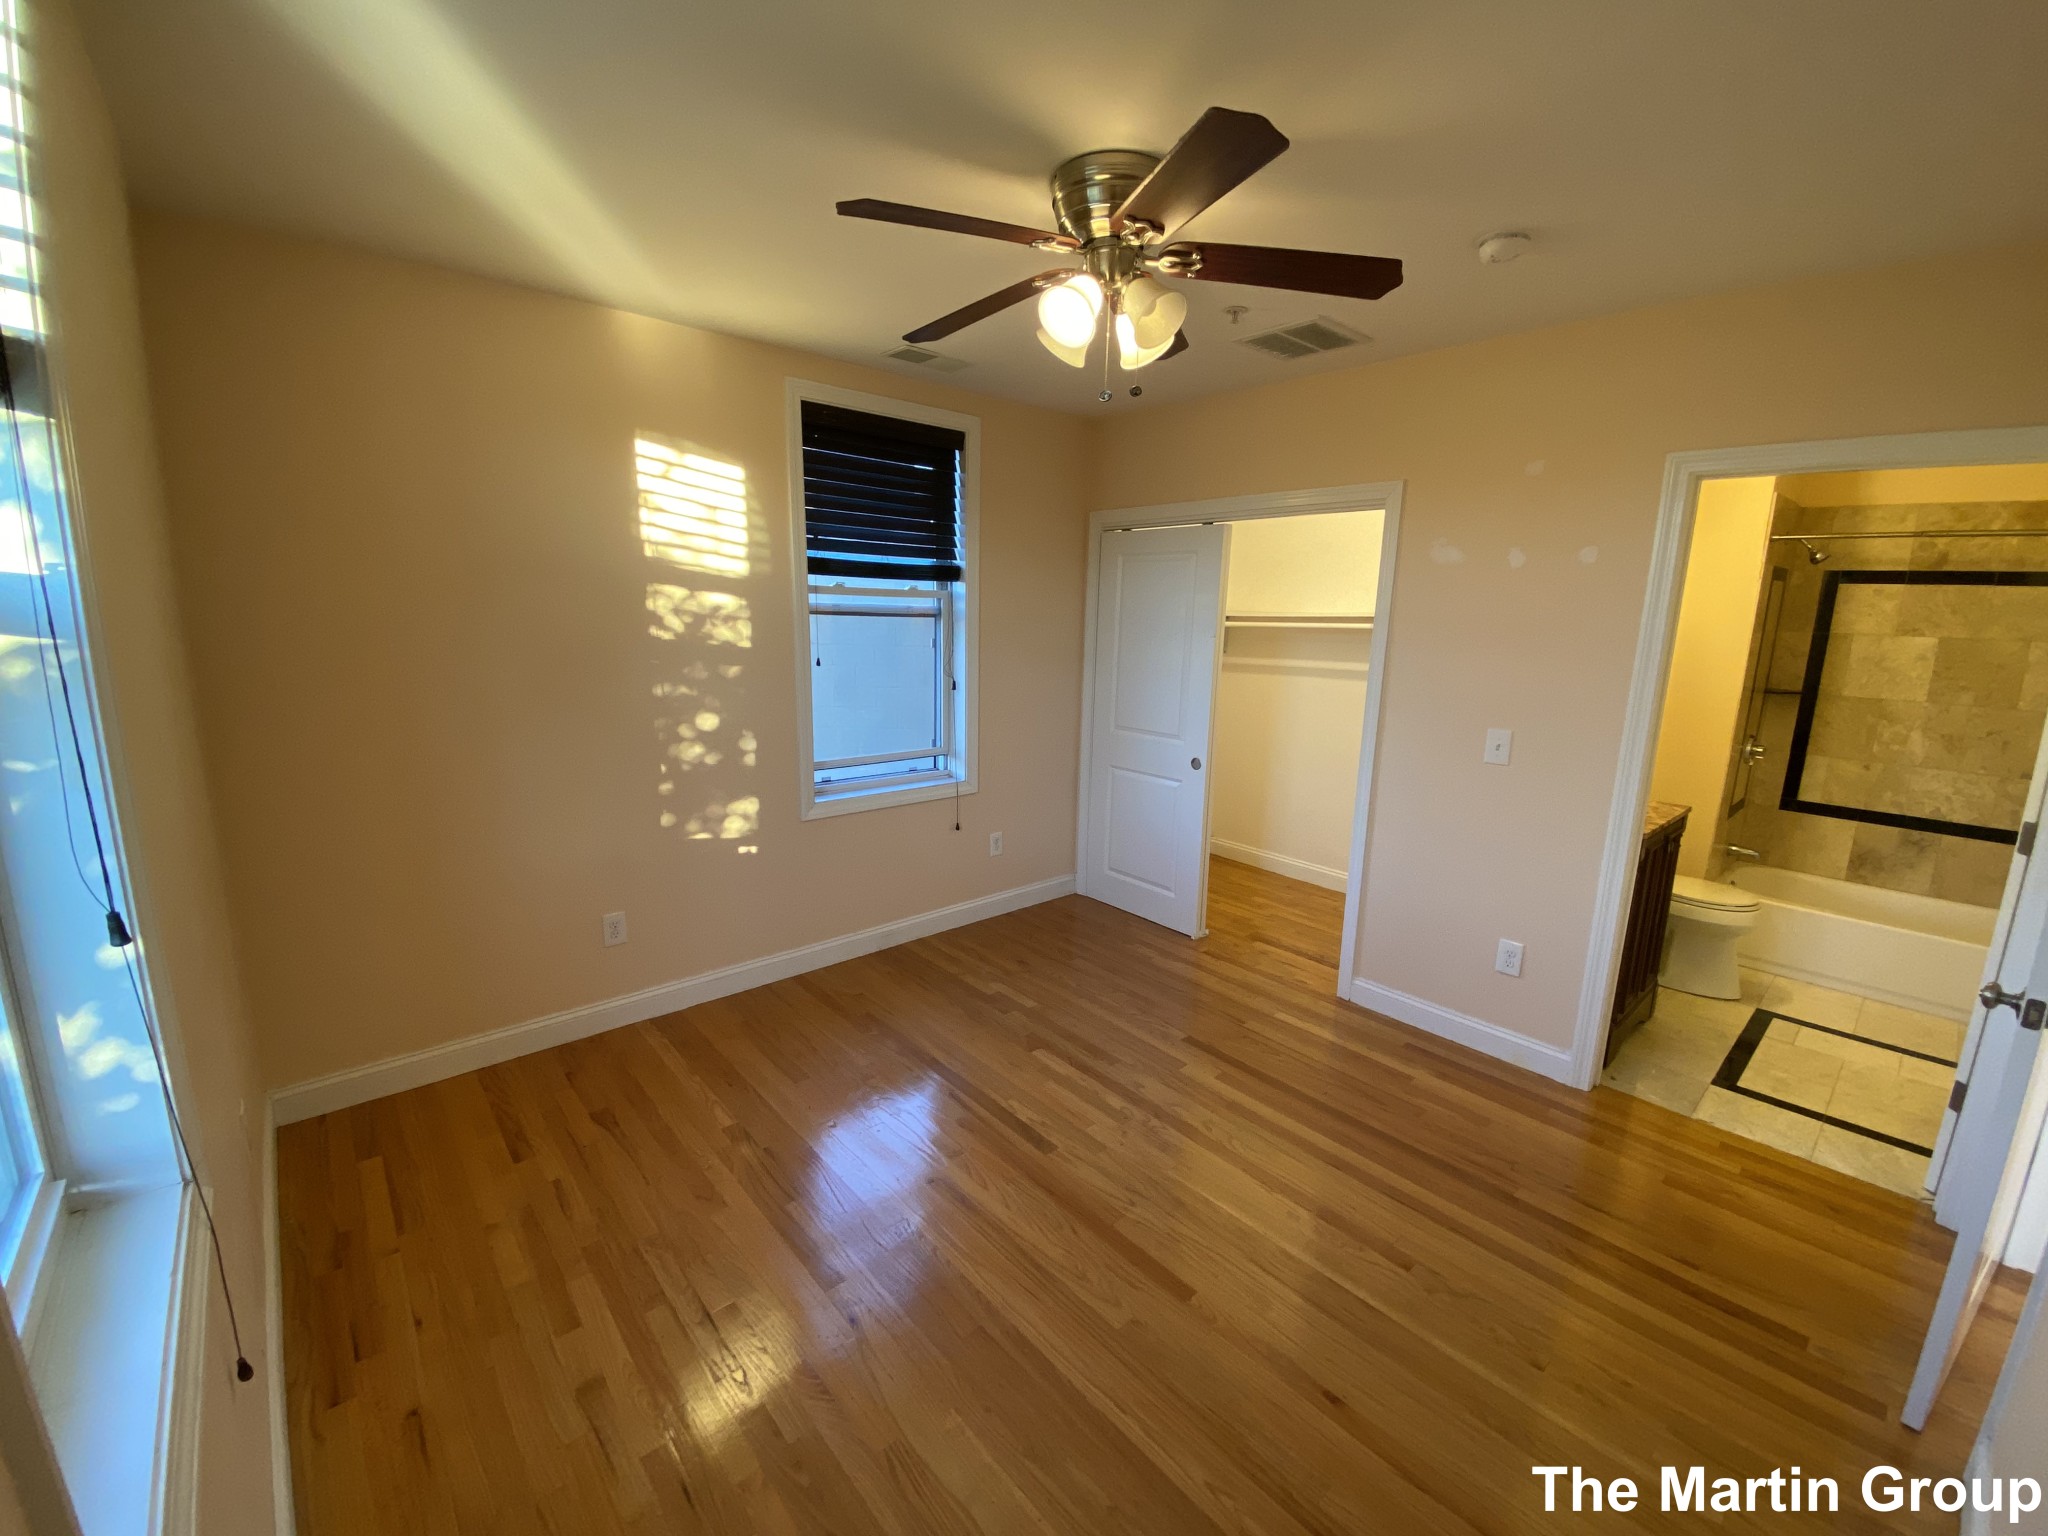 Photos of apartment on Fellsway West,Somerville MA 02145